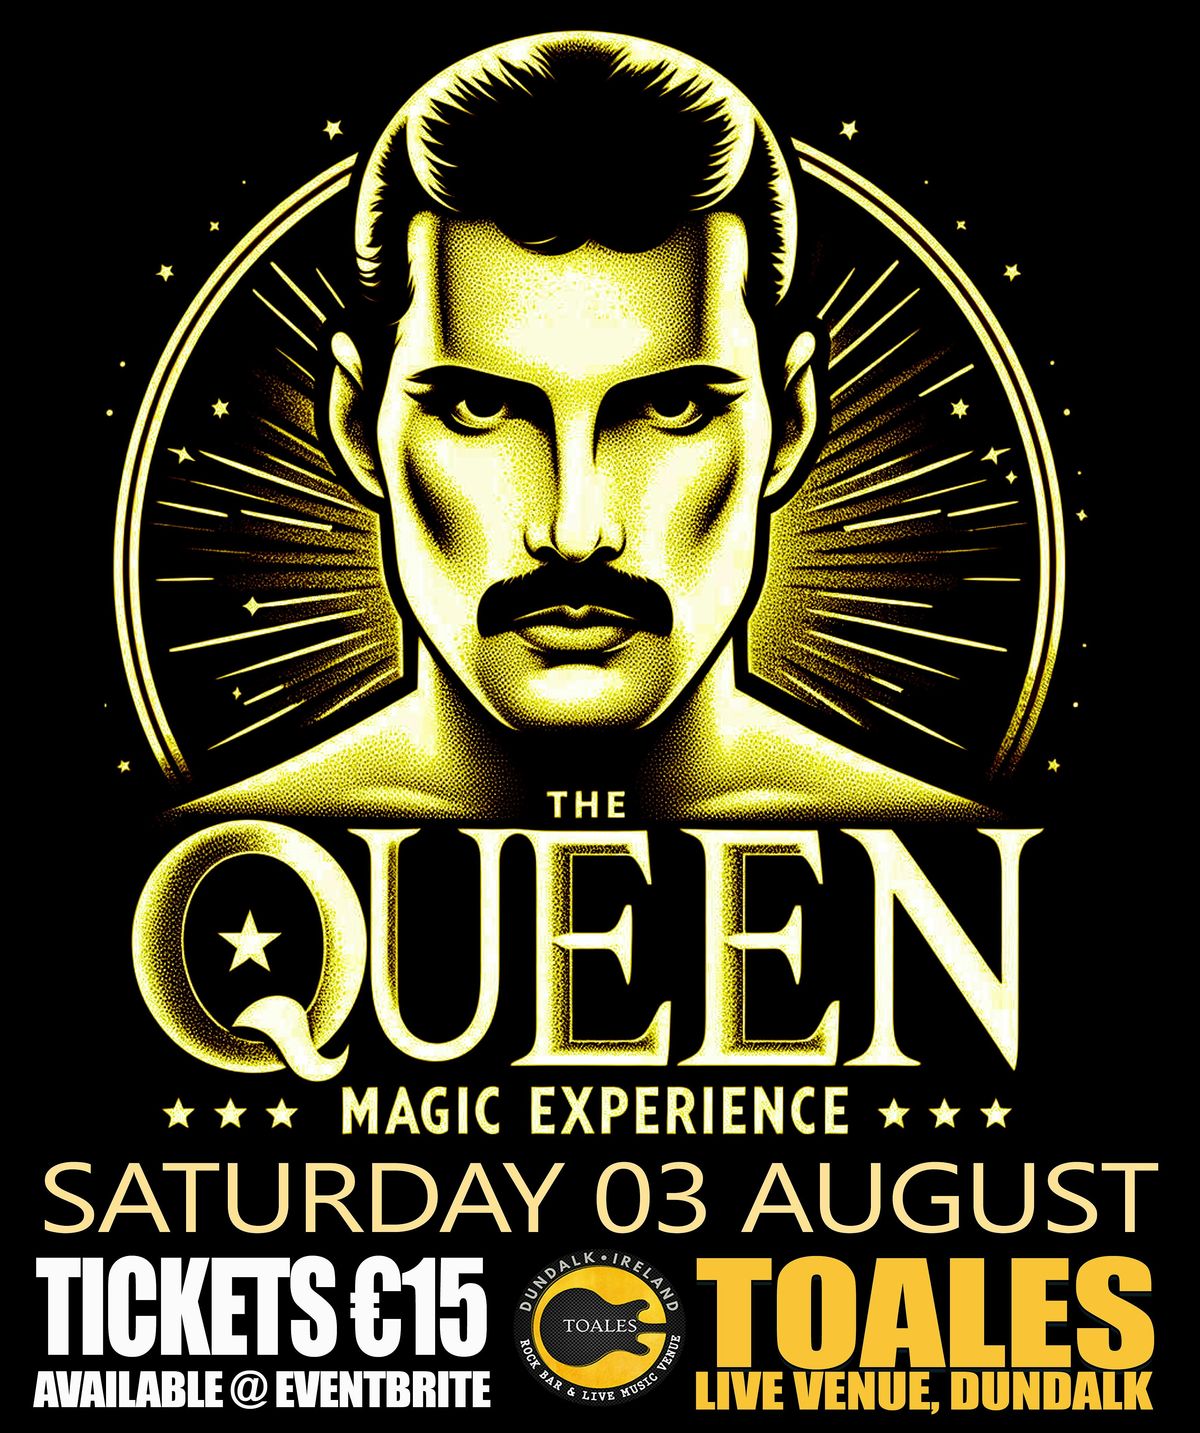 THE QUEEN MAGIC EXPERIENCE - Toales Venue - SAT 03 AUG